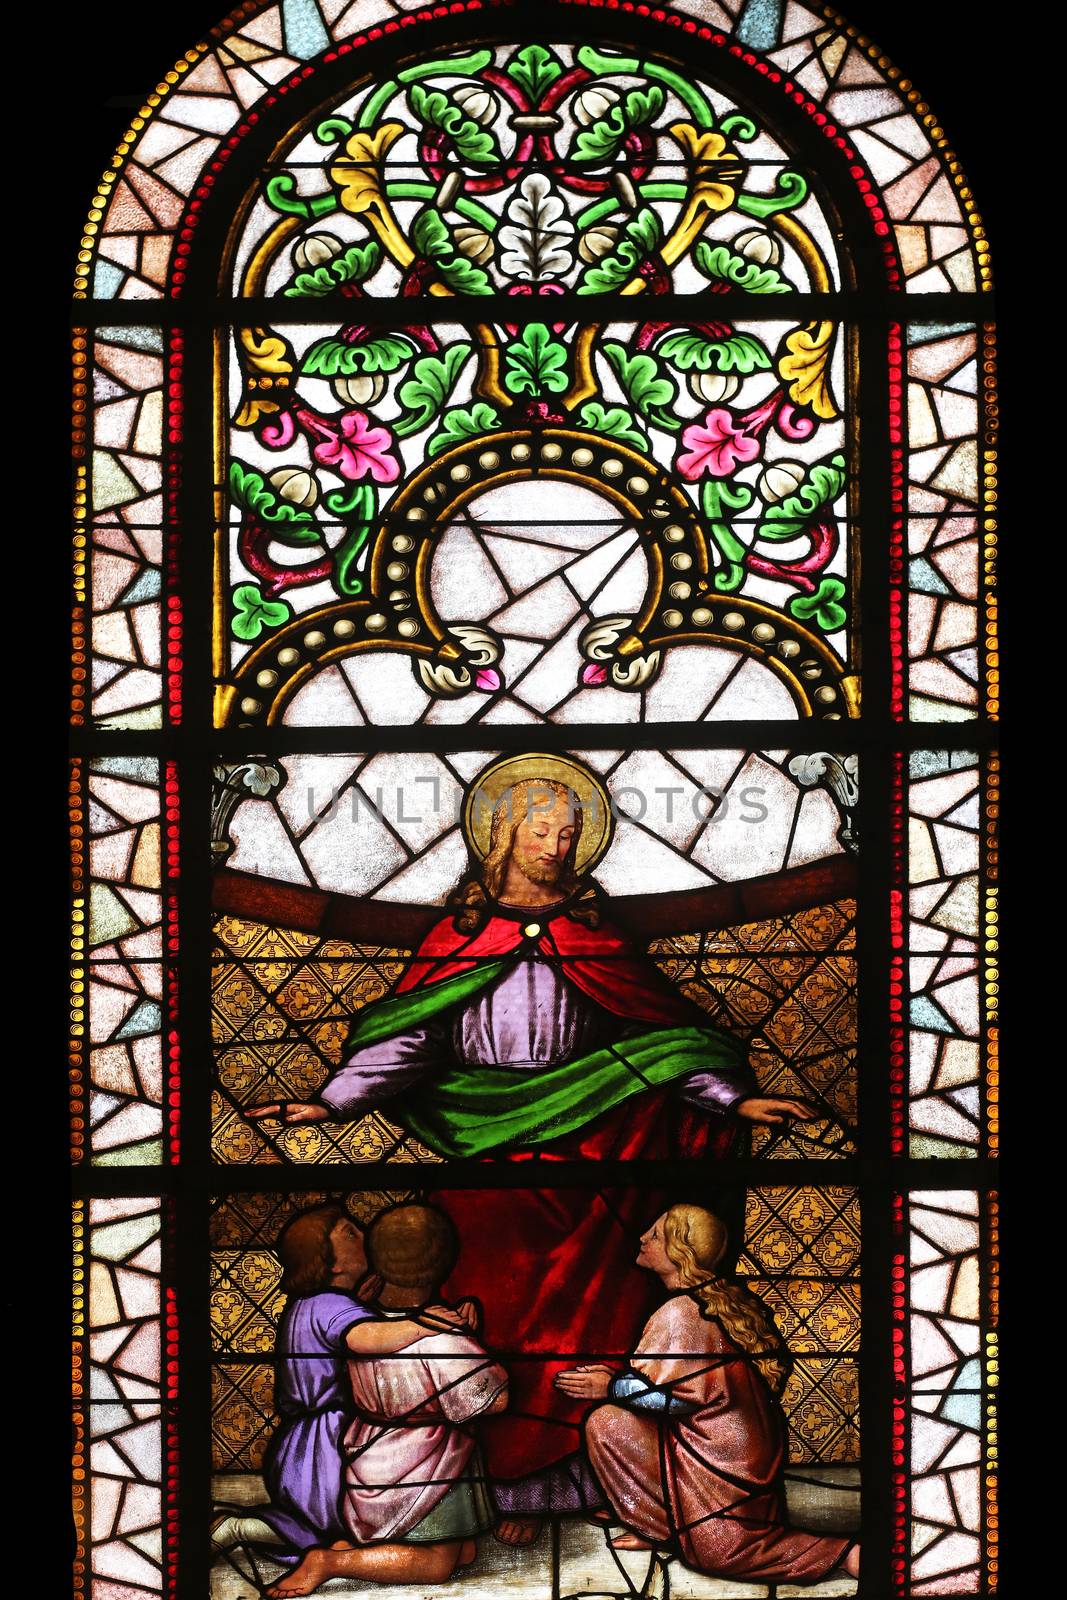 Jesus friend of children, stained glass window in the Church of St. Vincent de Paul in Zagreb, Croatia